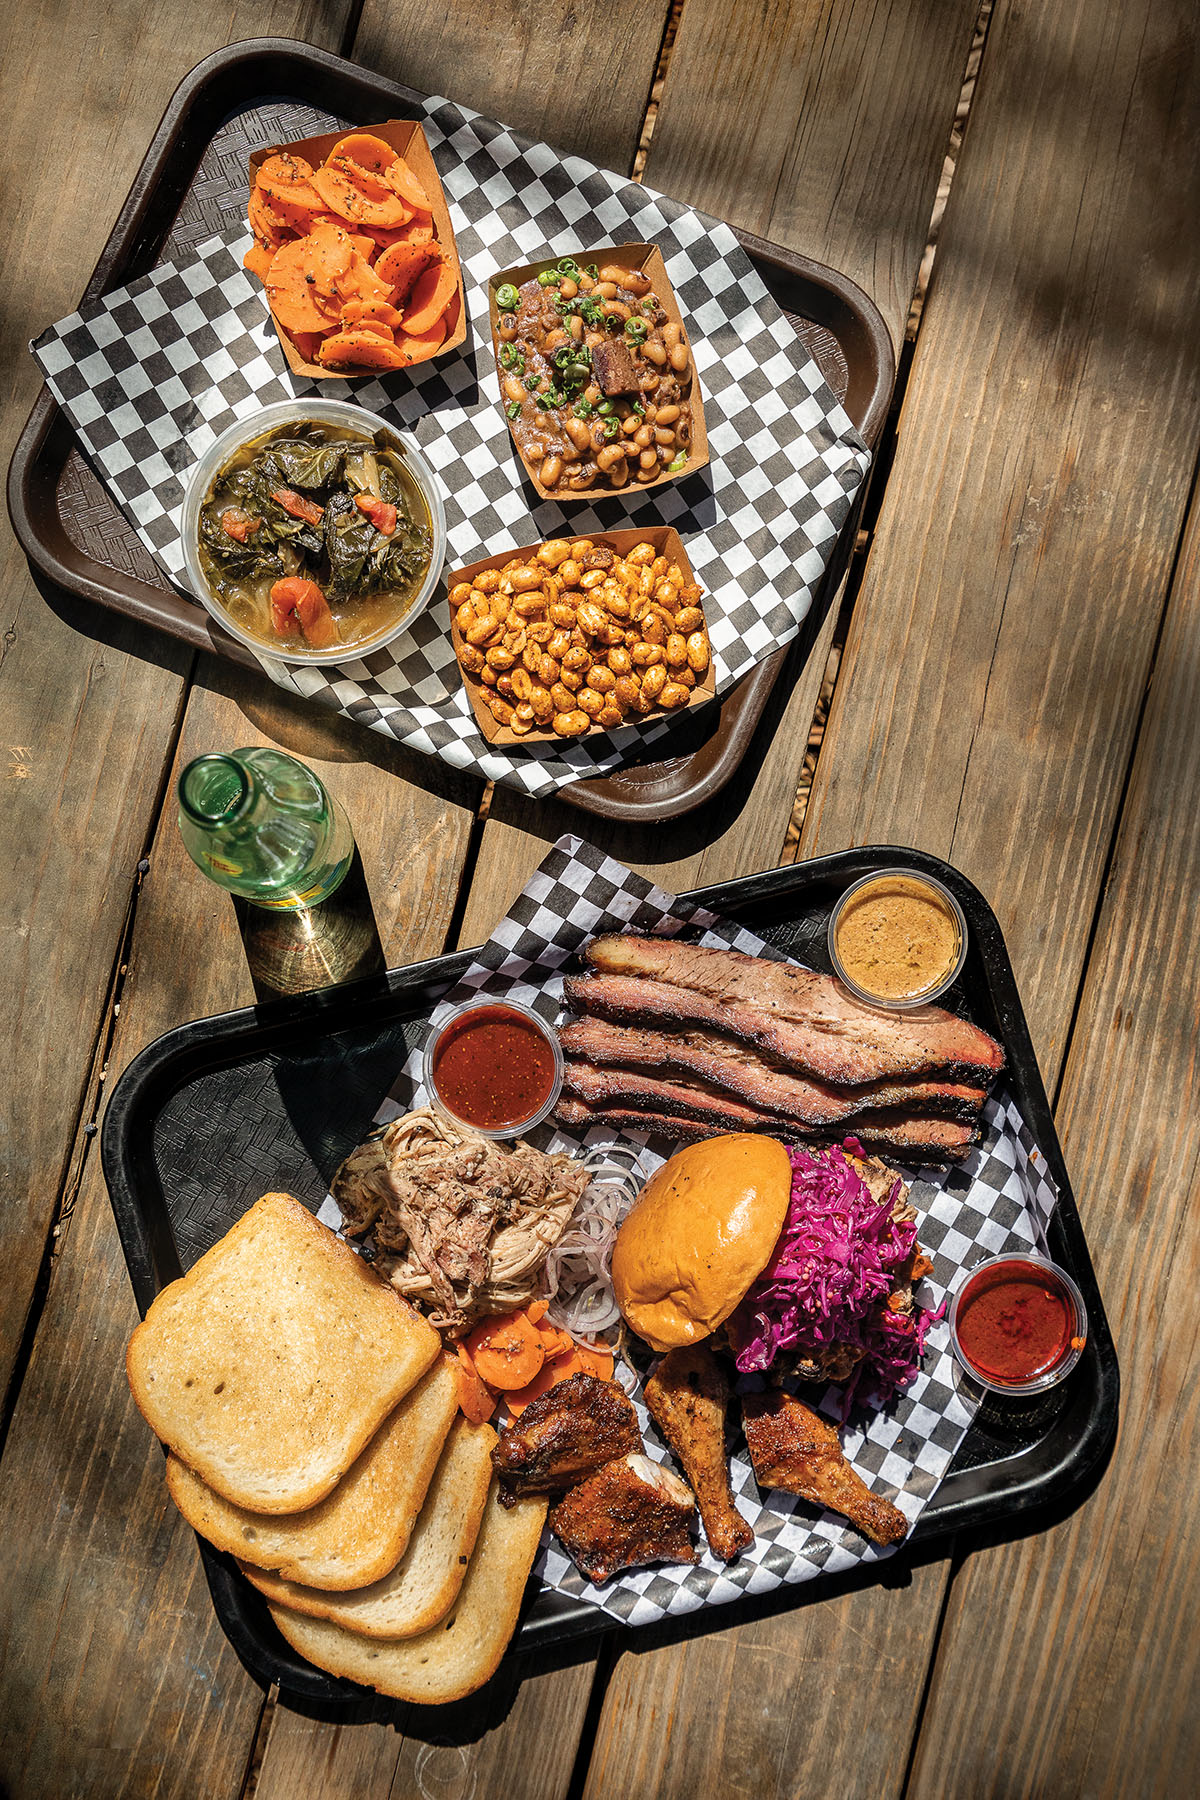 An overhead view of two trays of barbecued meats, bread, side dishes on a checkered paper backing